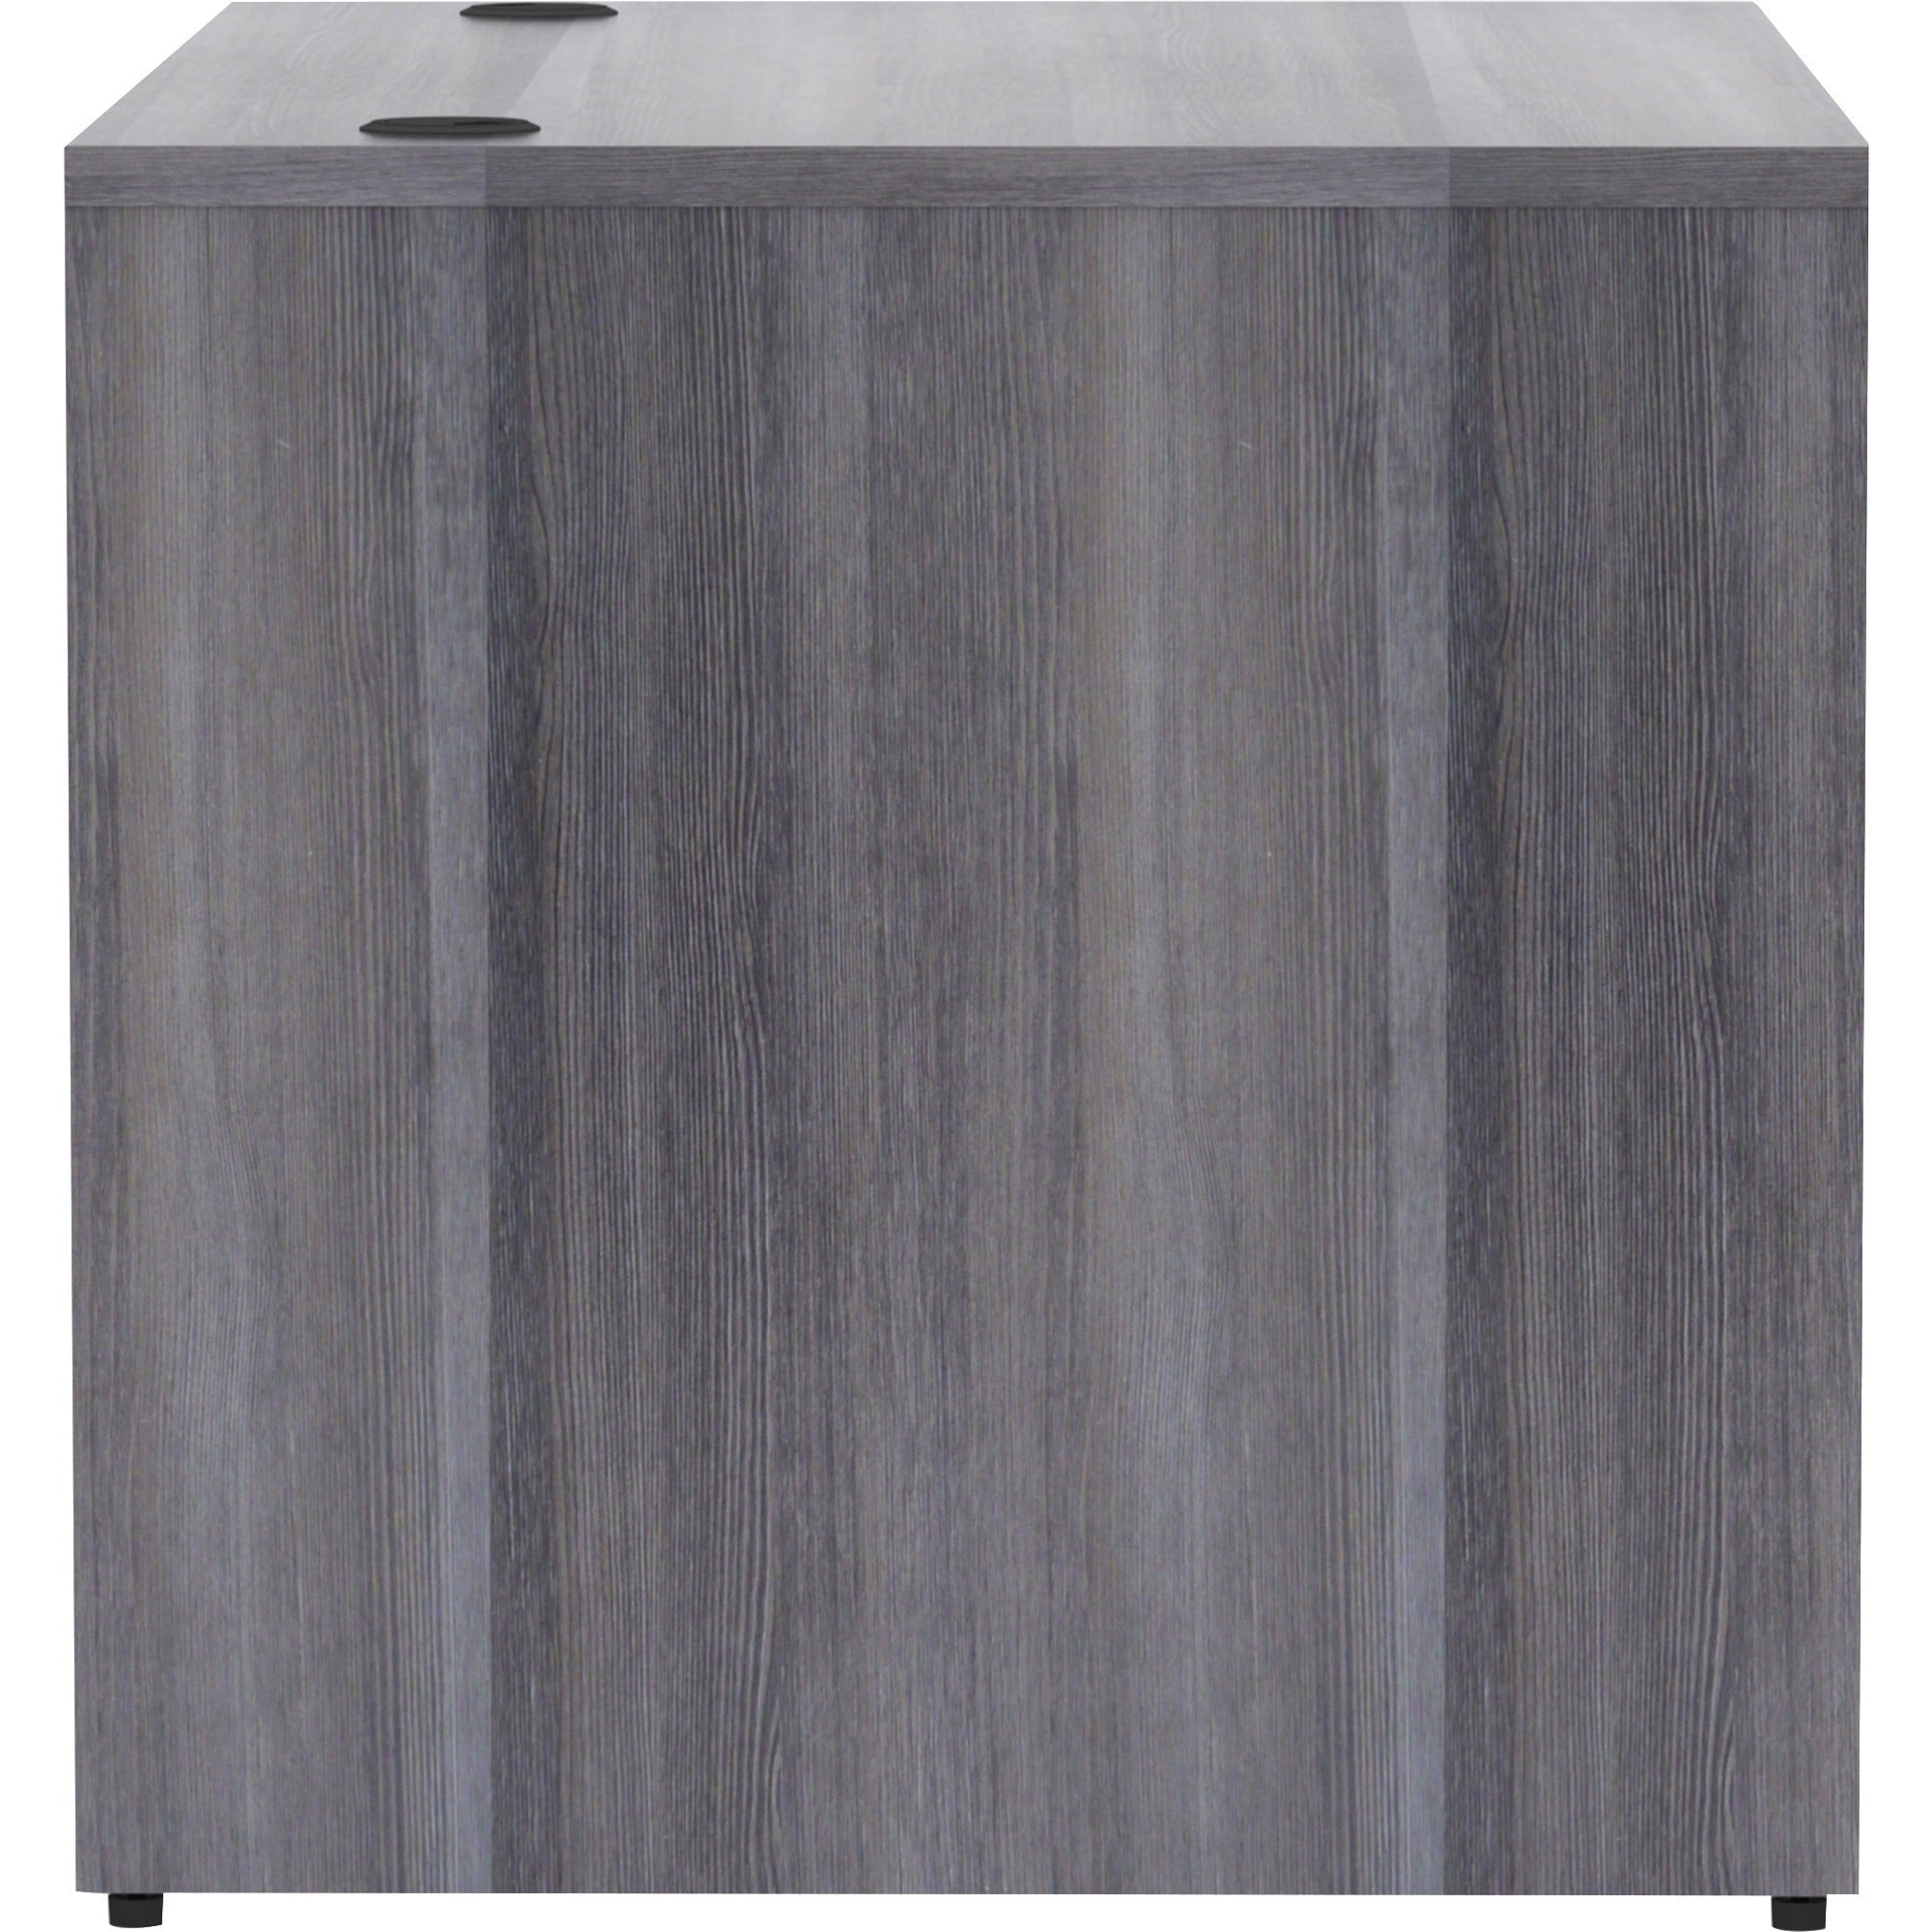 lorell-essentials-series-rectangular-desk-shell-48-x-30295--1-top-laminate-weathered-charcoal-table-top-grommet_llr69548 - 3